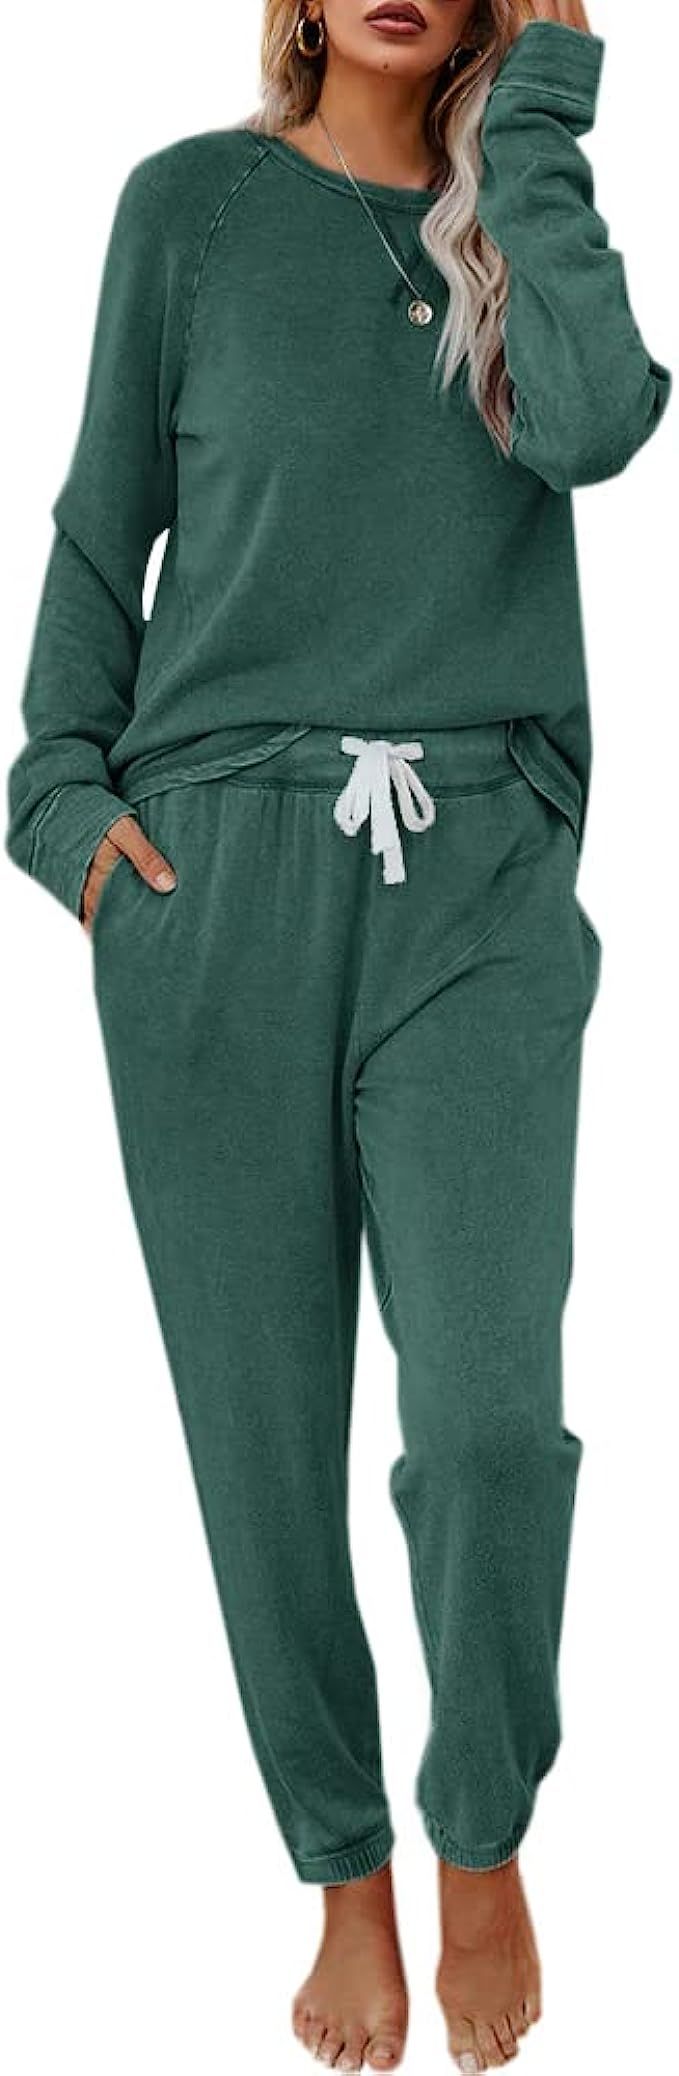 Eurivicy Women's Loungewear Set Solid 2 Piece Long Sleeve Pullover and Drawstring Sweatpants Spor... | Amazon (US)